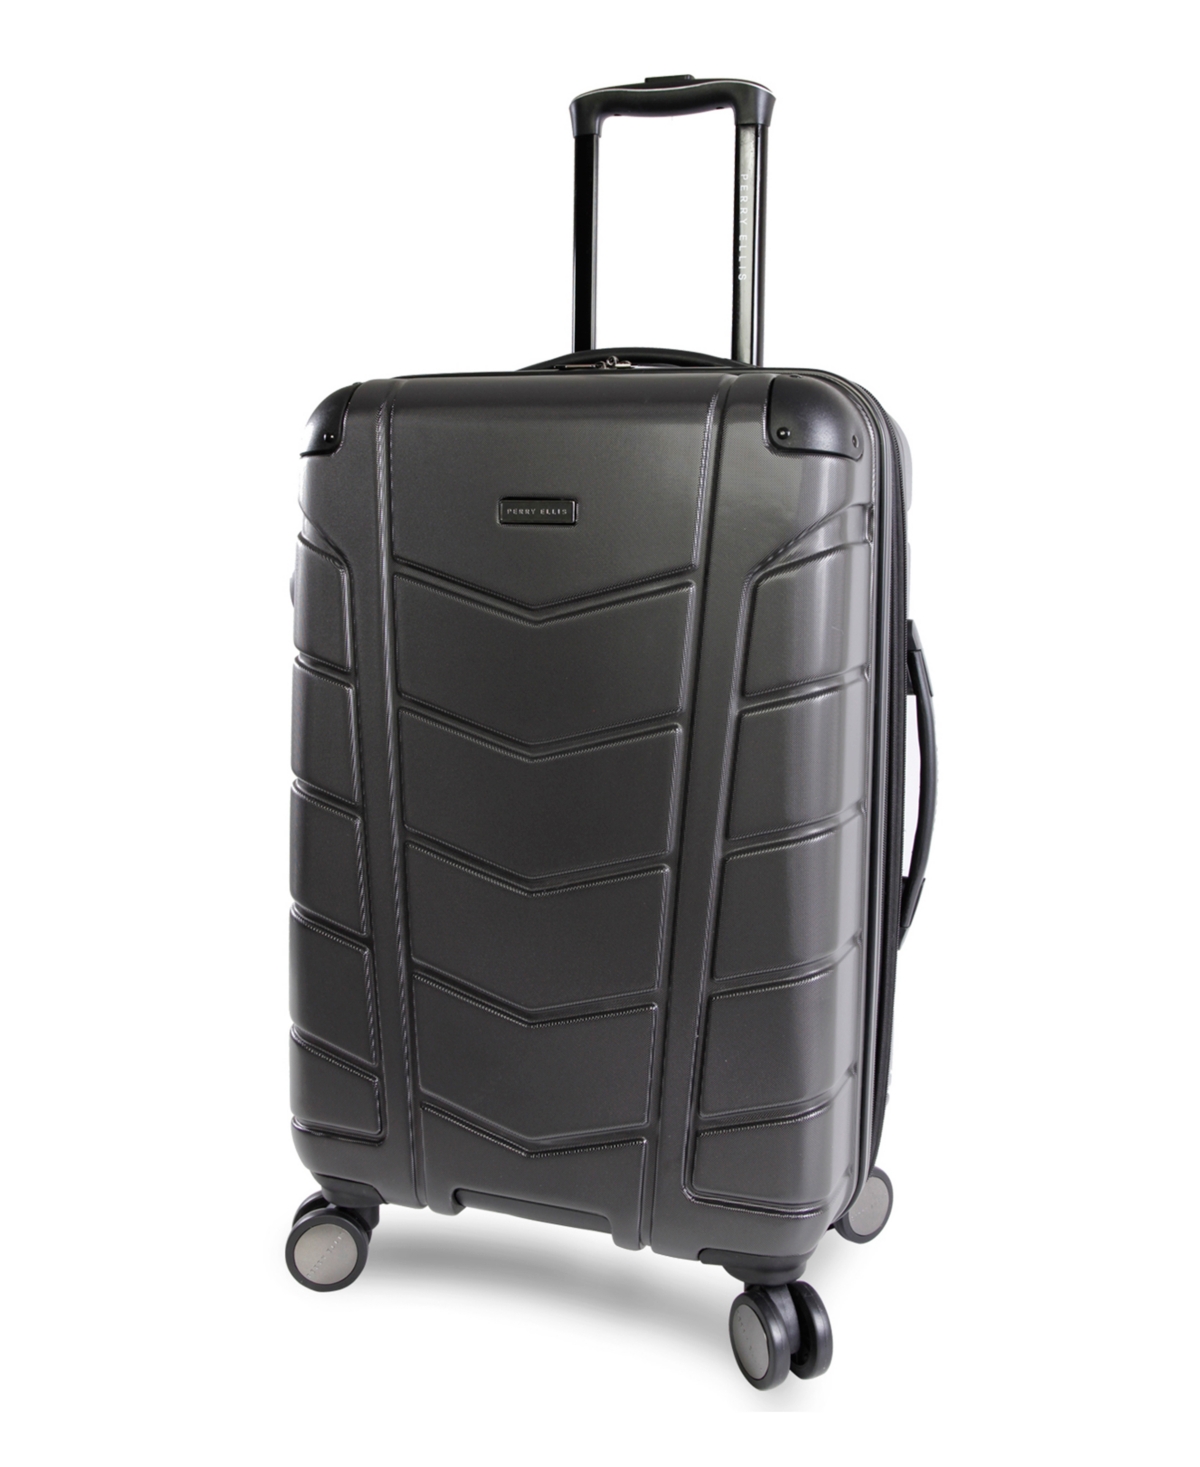 Tanner 29" Spinner Luggage - Charcoal